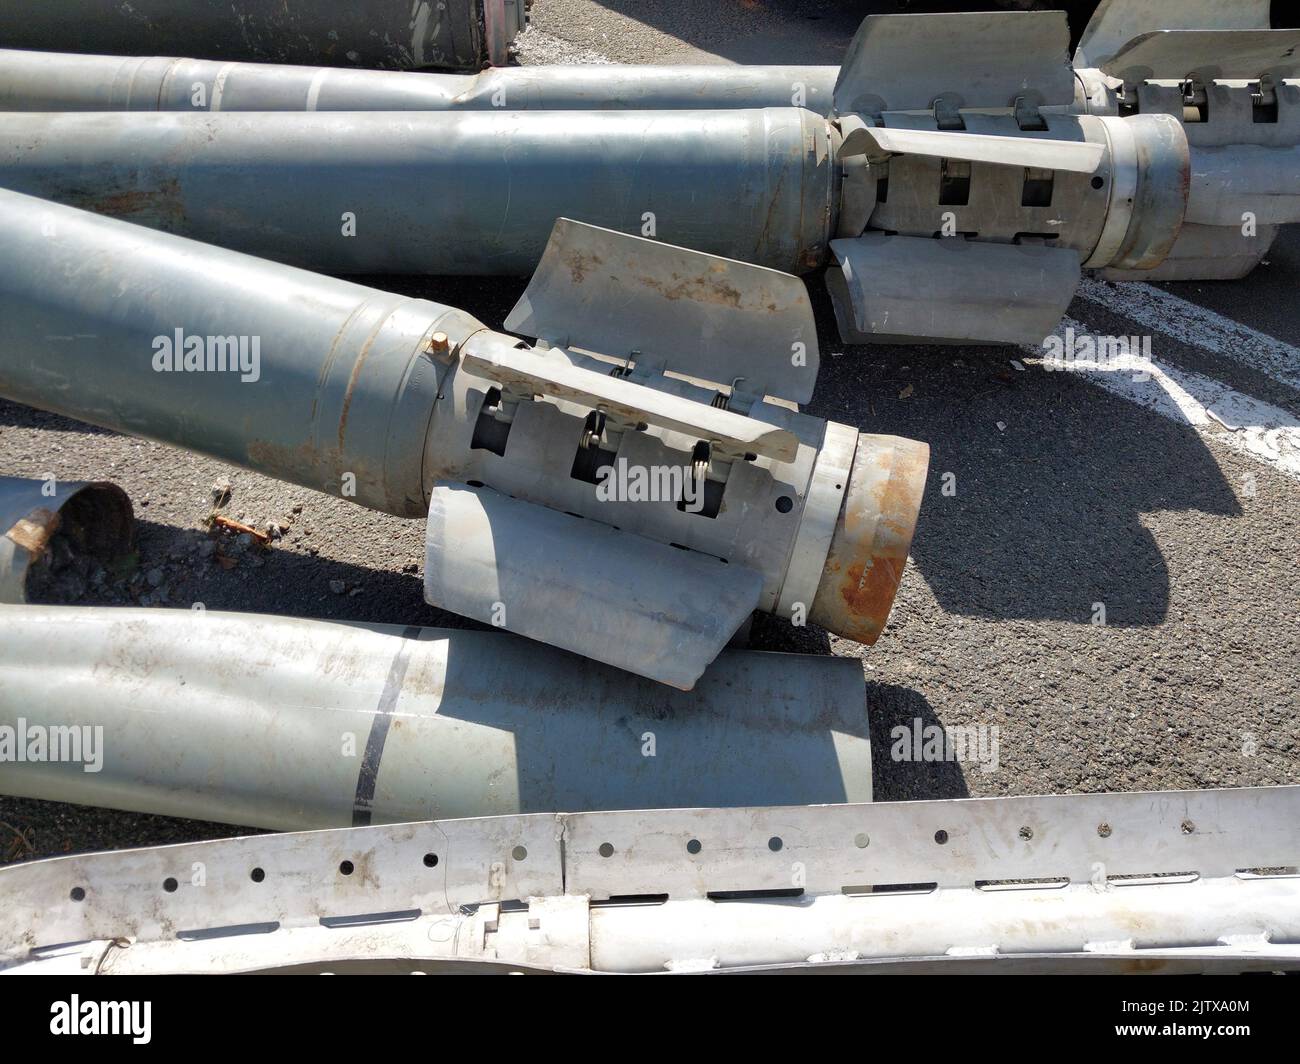 Cluster munition missiles destroyed in a the war. Stock Photo